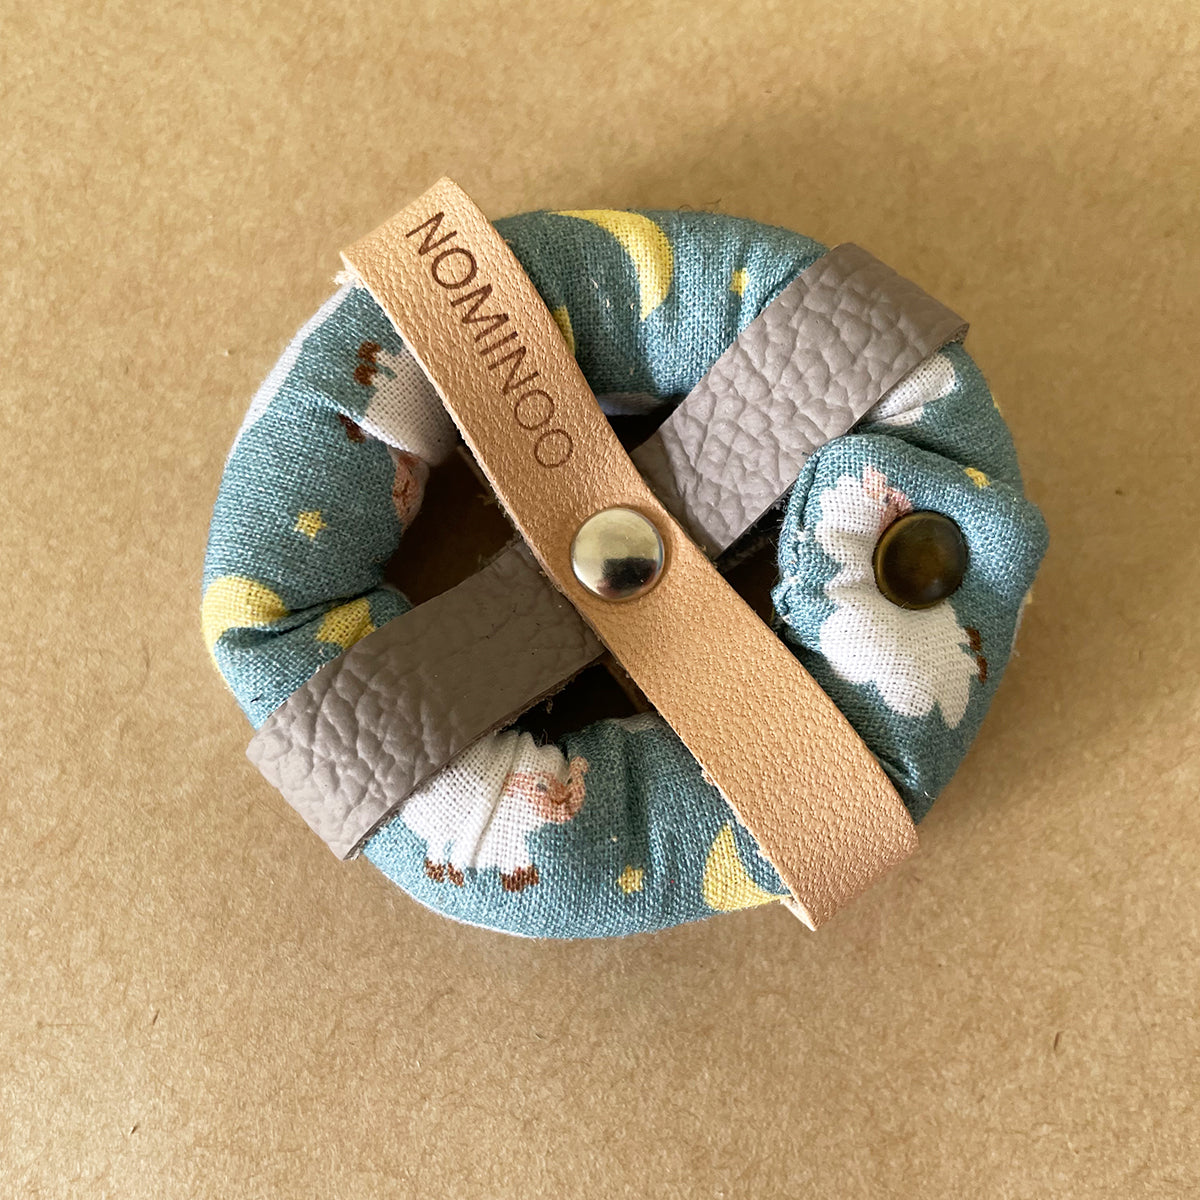 Nominoo Catnip Toy, Made From Leather & Fabric Into Donut Shape | at Made Moggie